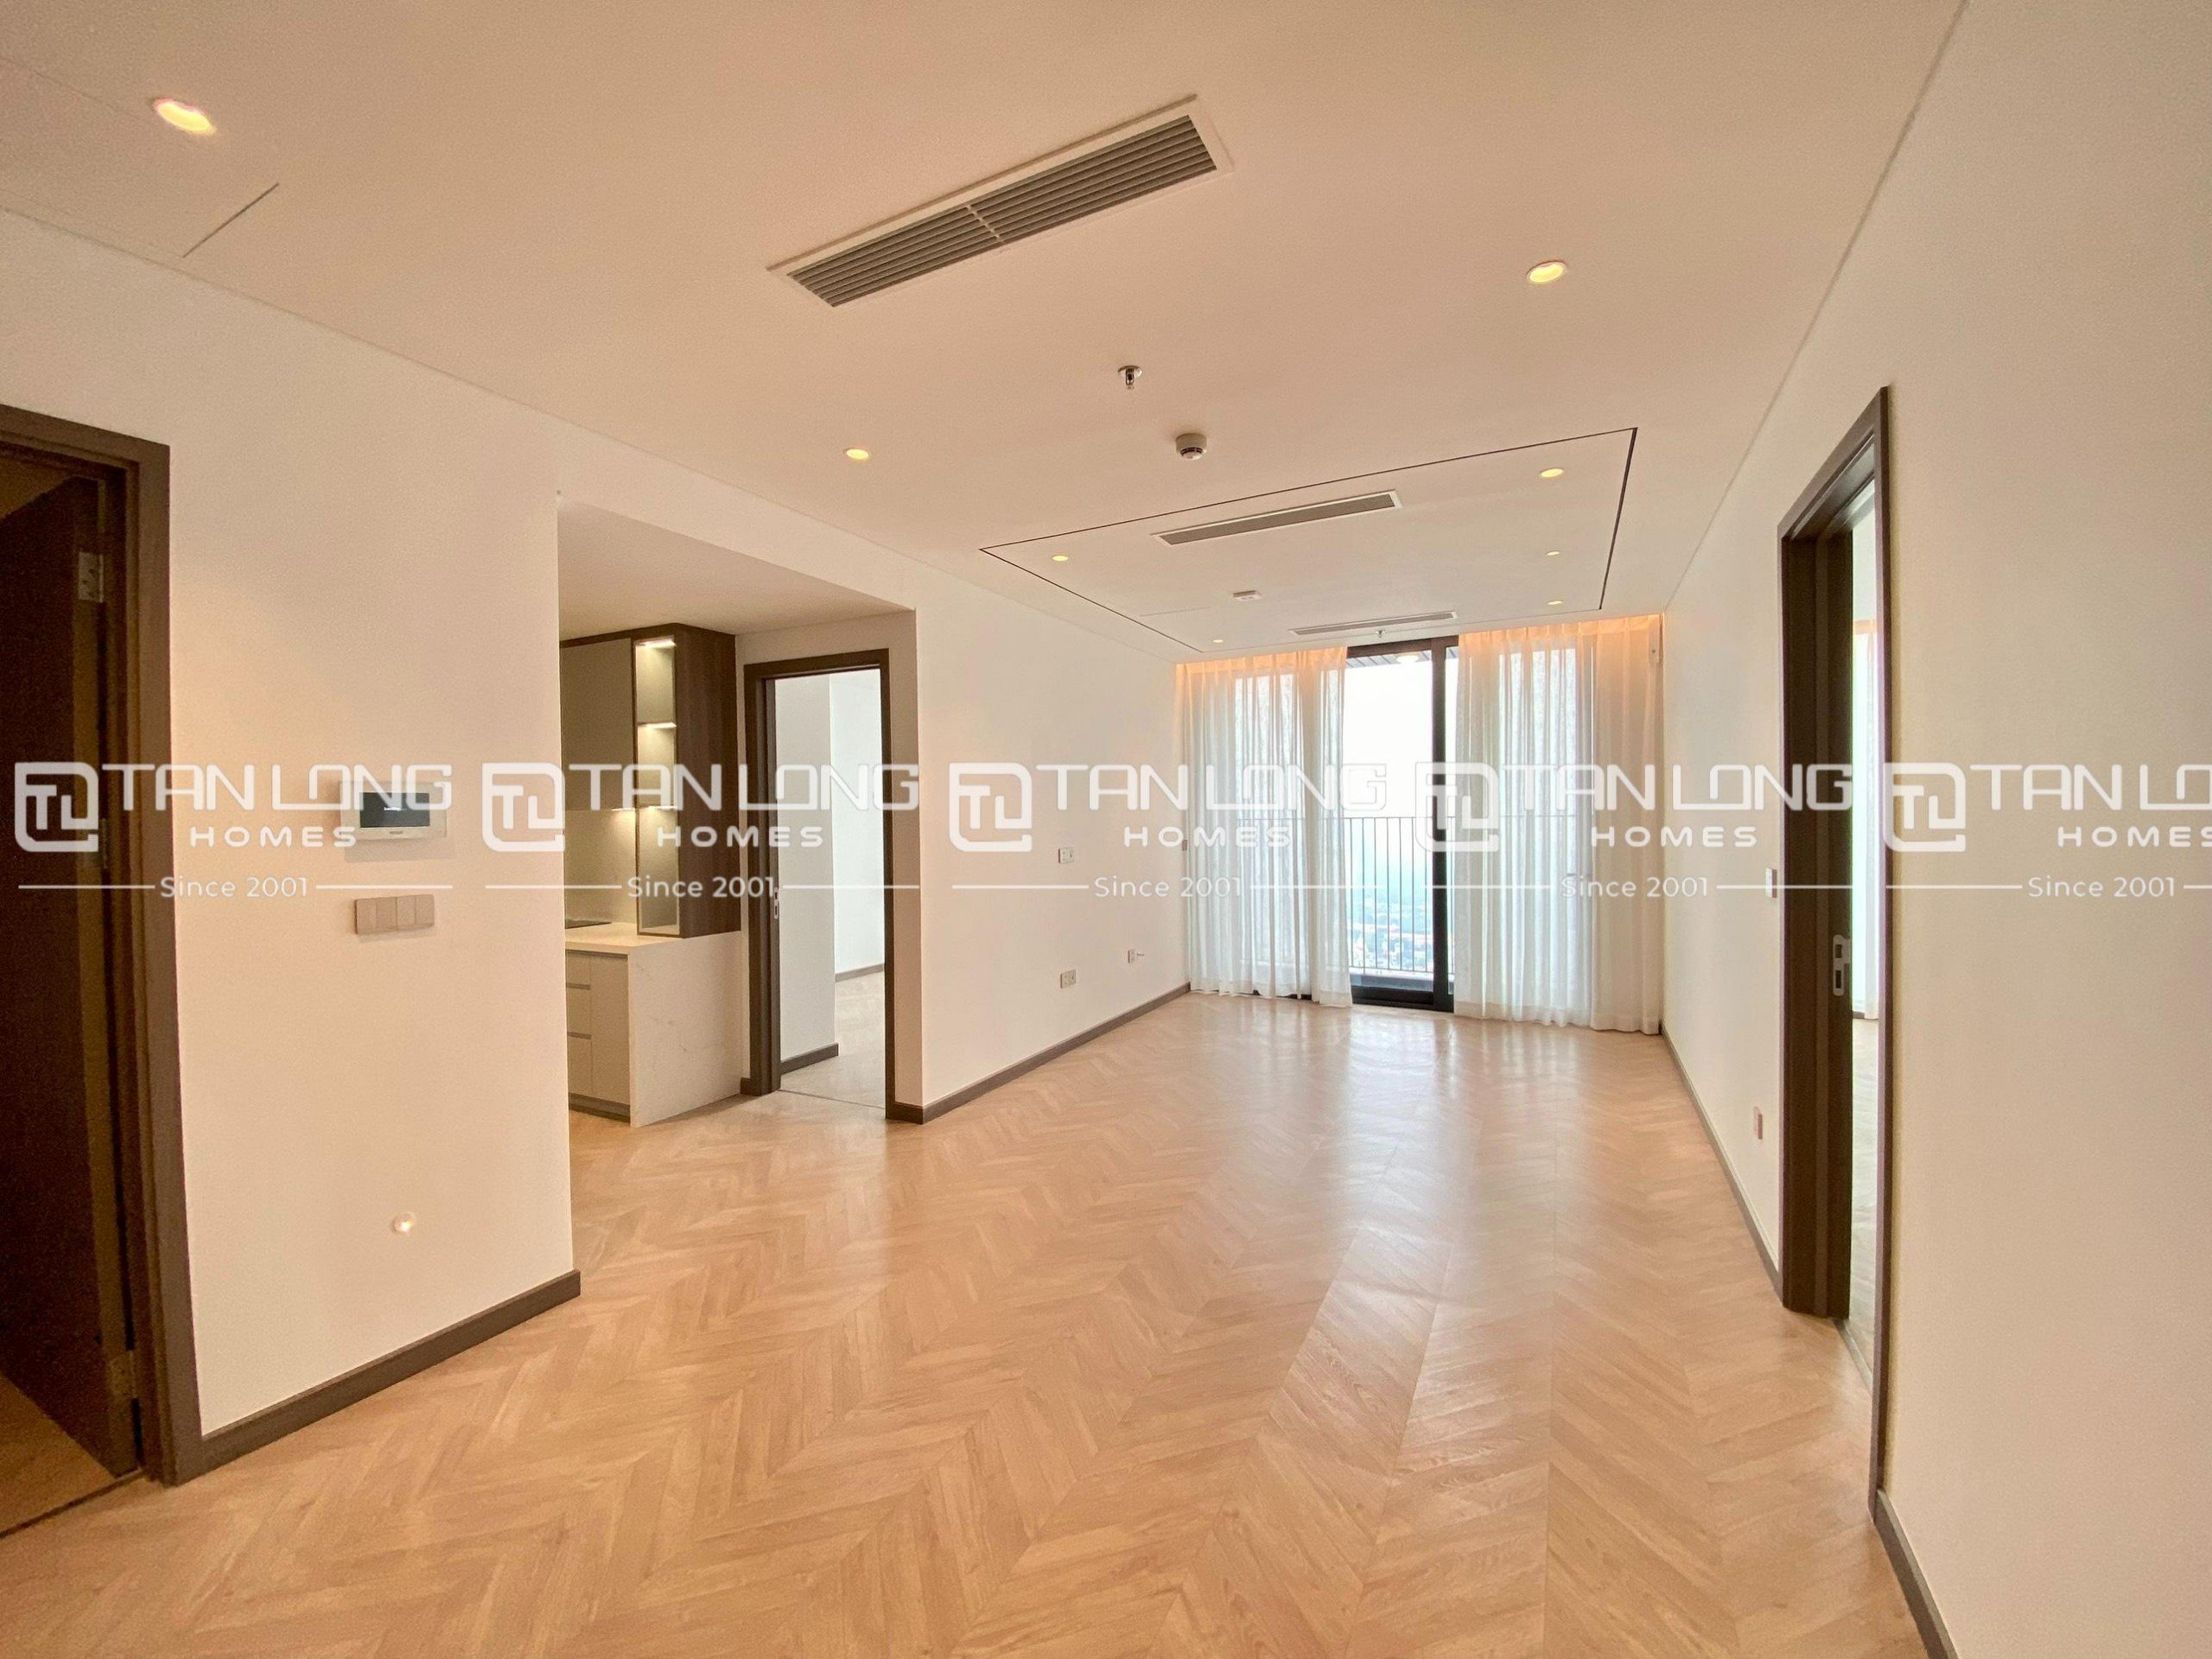 For rent: 3-bedroom apartment in the N01T6 building of Ngoai Giao Doan with built-in furniture